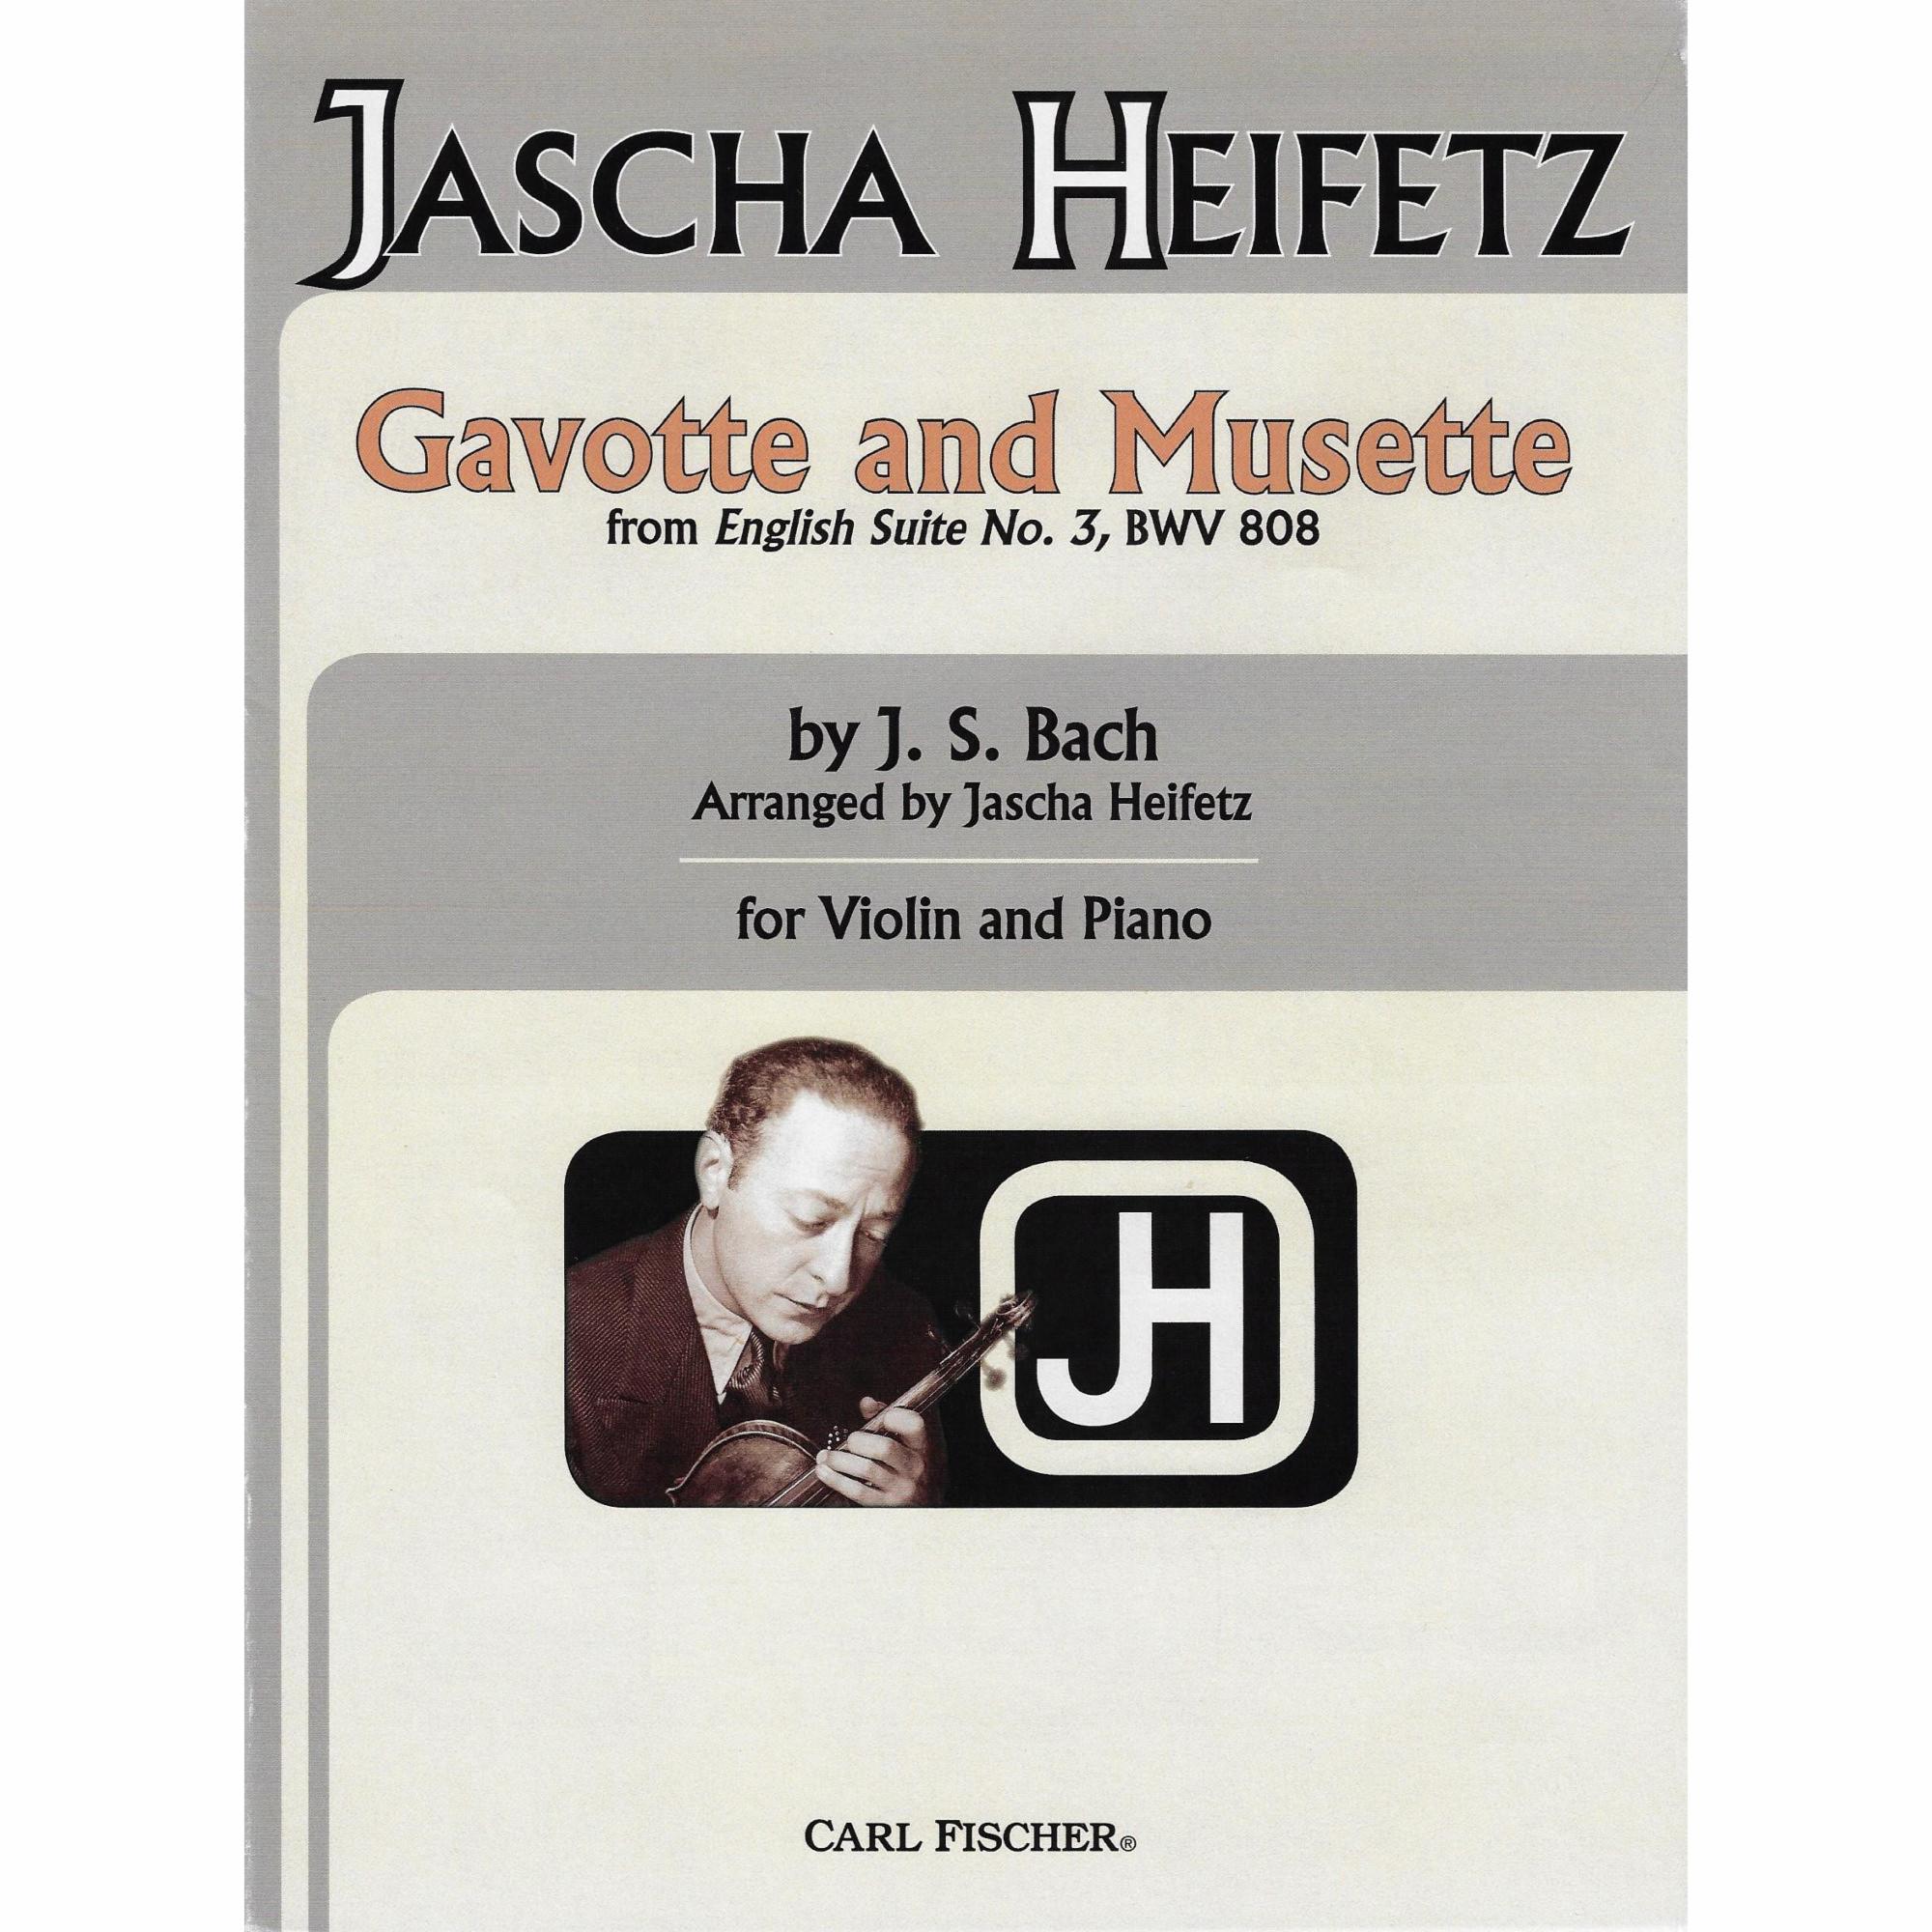 Bach -- Gavotte and Musette, from English Suite No. 3, BWV 808 for Violin and Piano